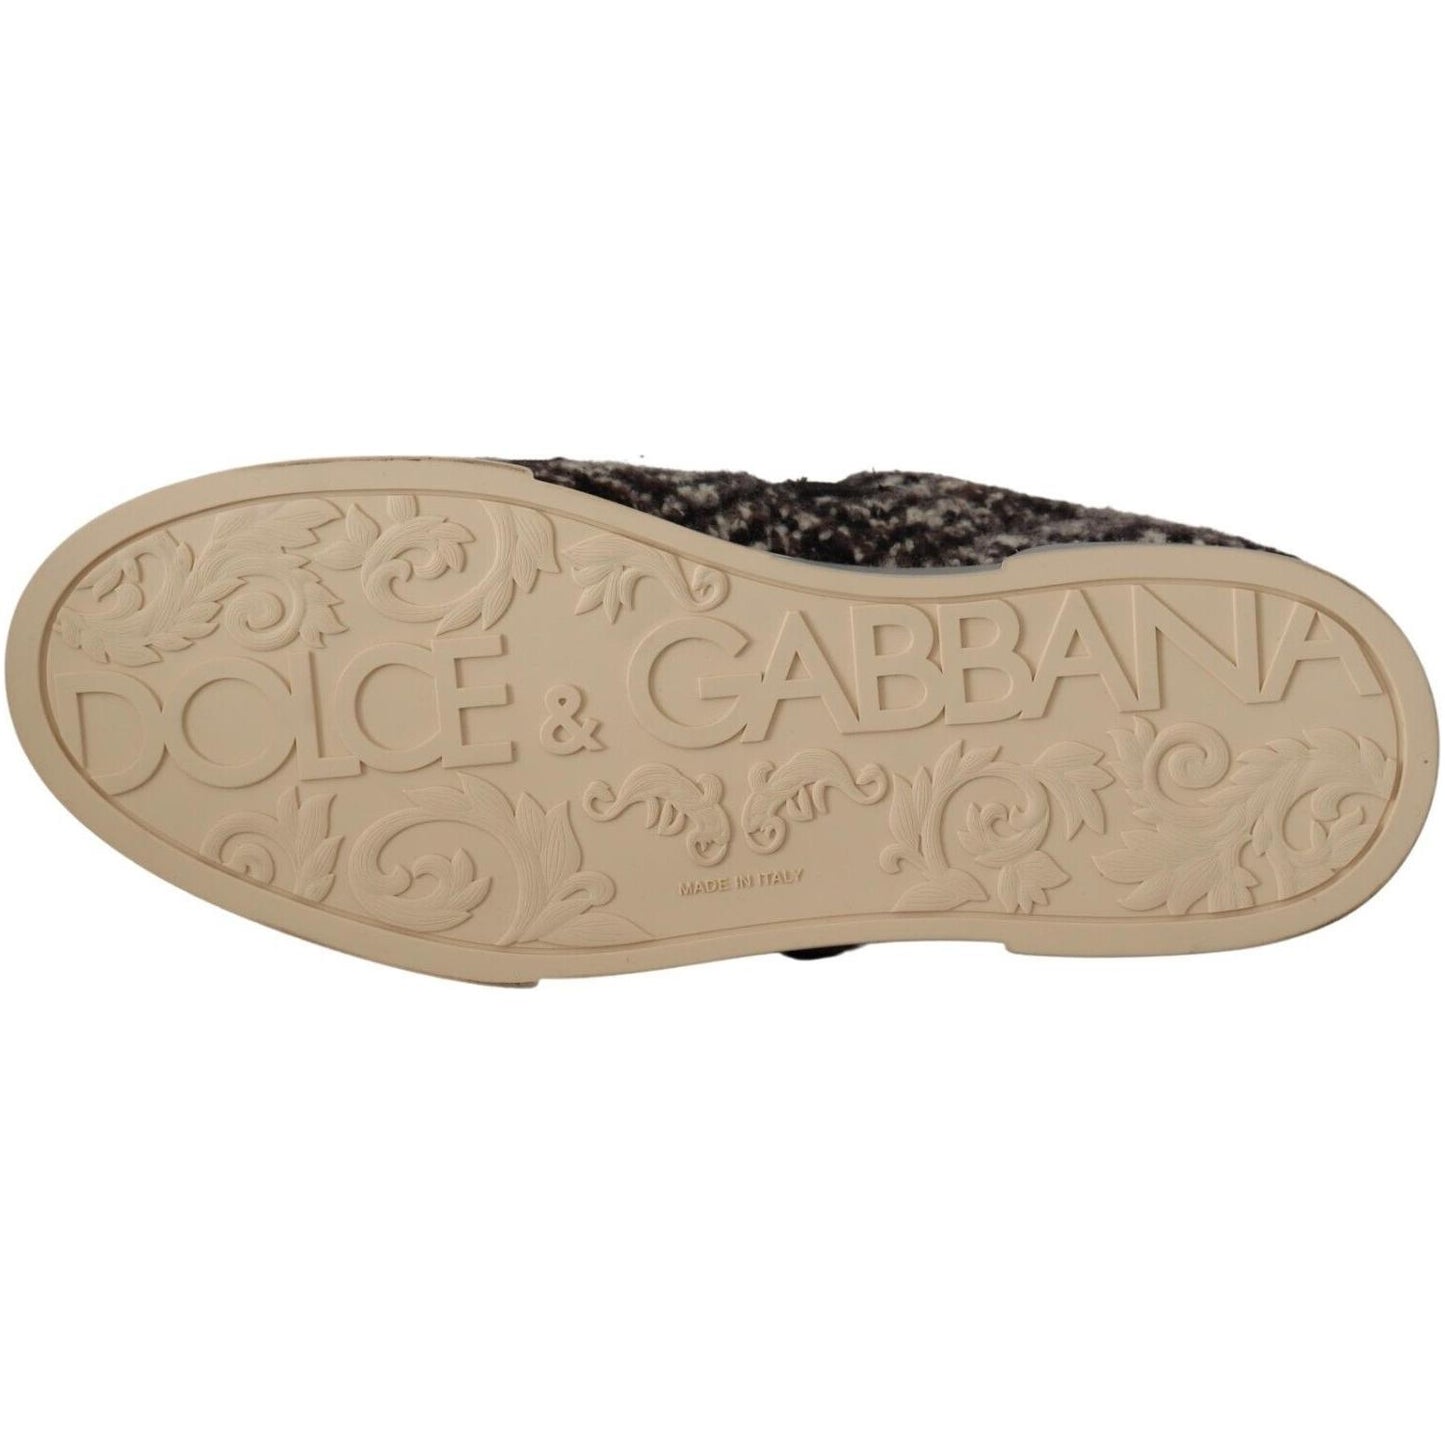 Dolce & Gabbana Silver Elegance Leather Sneakers silver-elegance-leather-sneakers